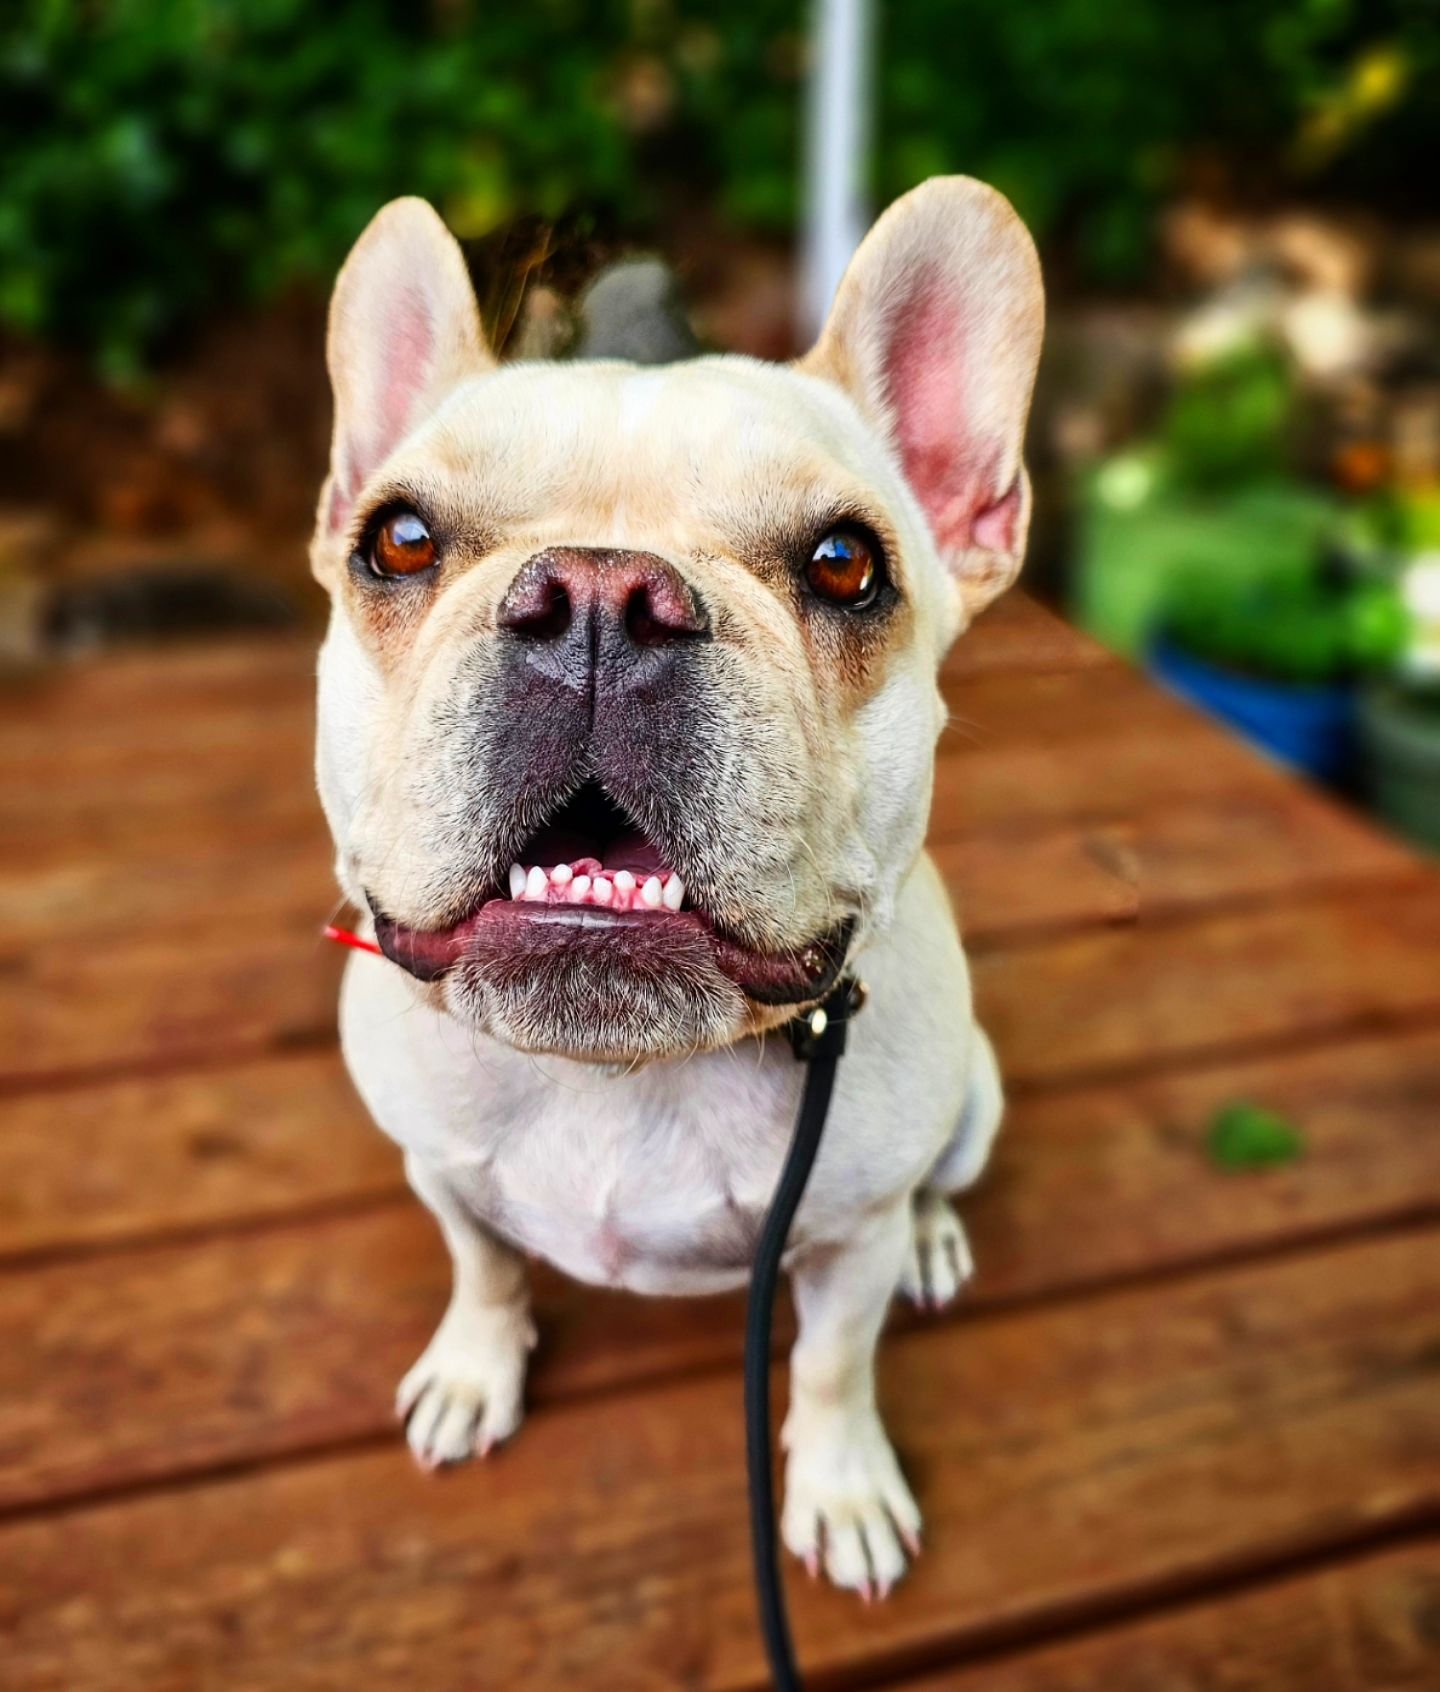 Say hi to Dolly the frenchie!

She's started a multi week Board and Train program to work on her socialization, leash manners, and work on her obedience. 

She's been a sweetheart so far, and I look forward to seeing her progress over the next few we